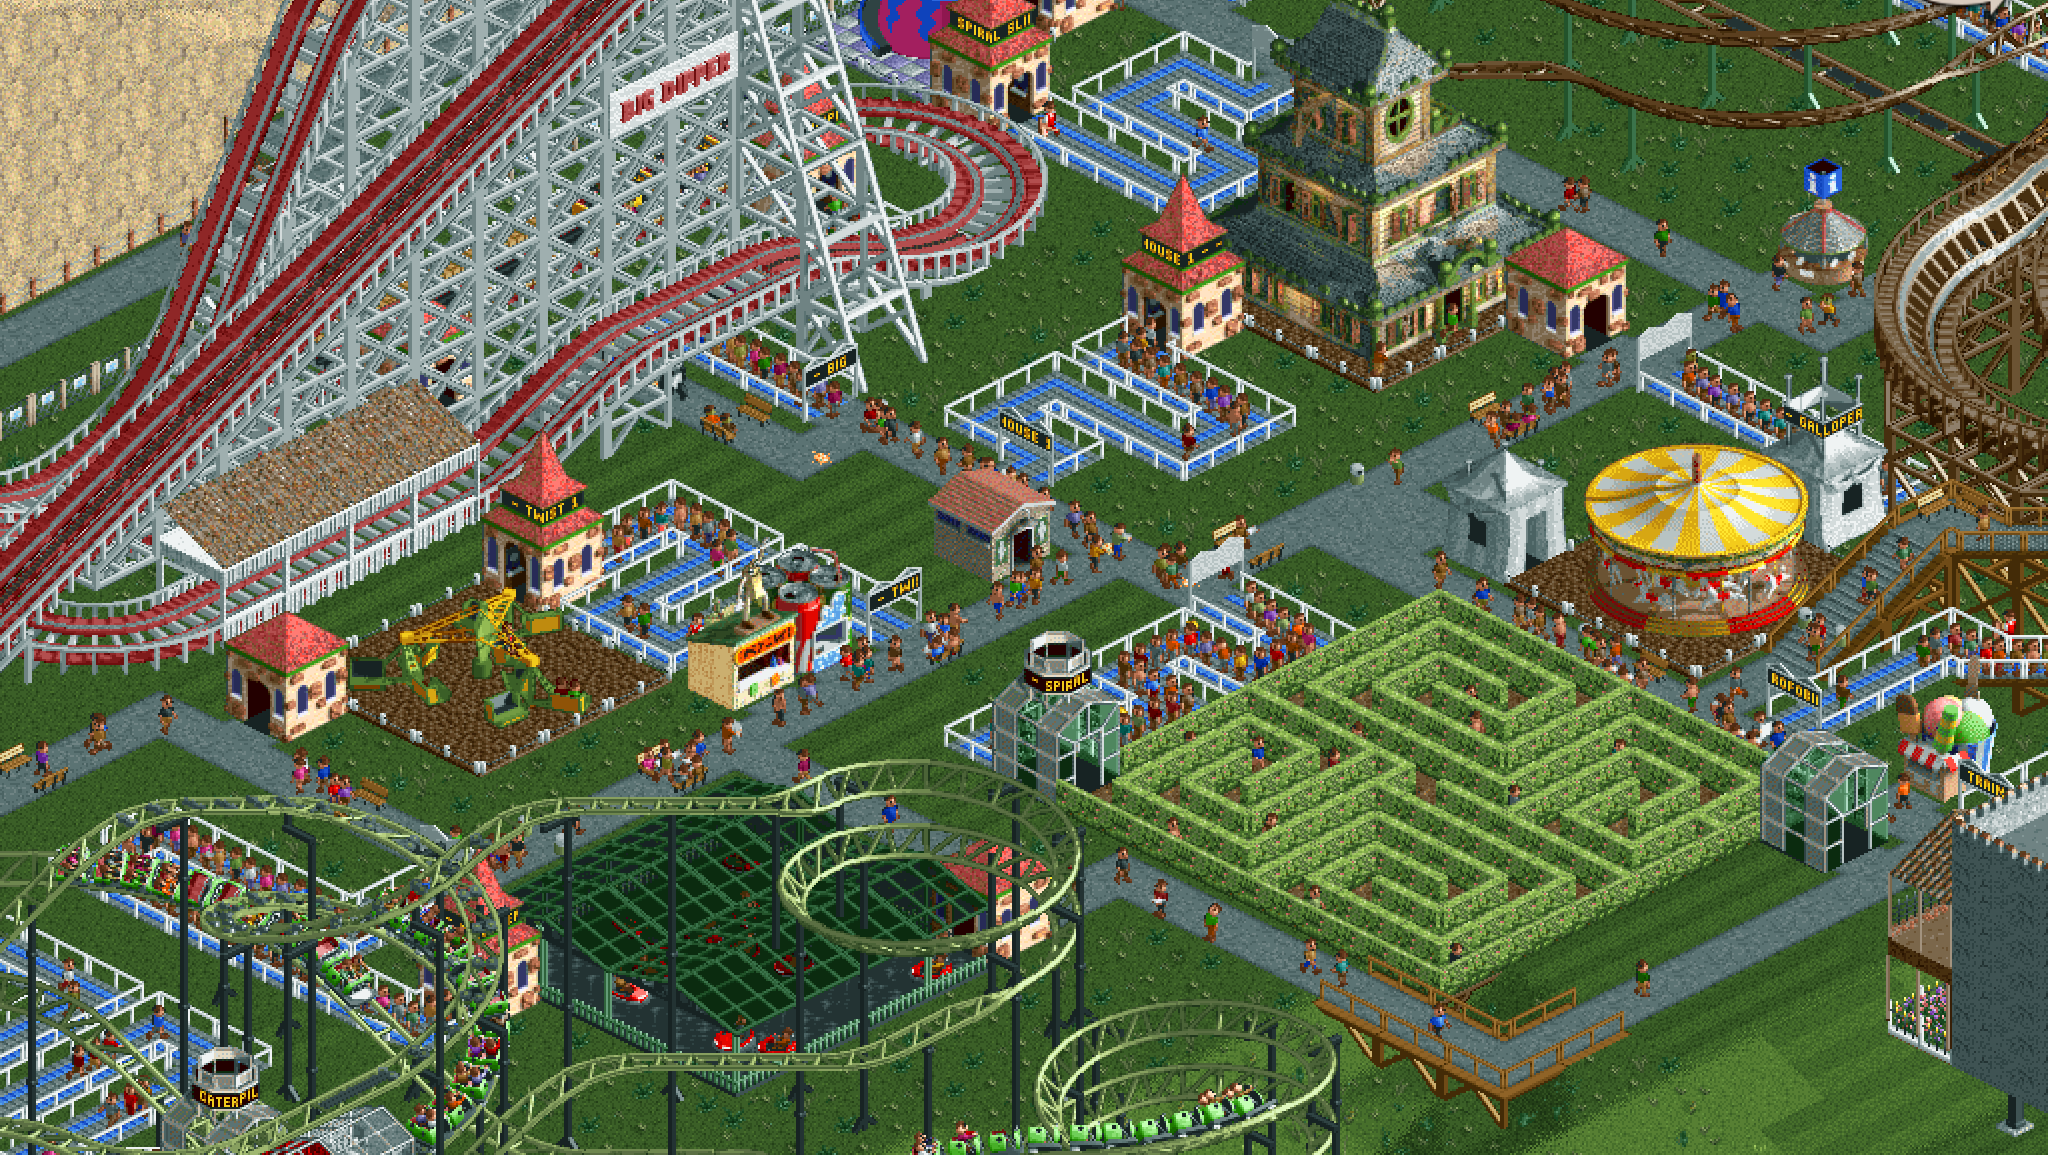 Retro Video Games That Stand Up - Rollercoaster Tycoon